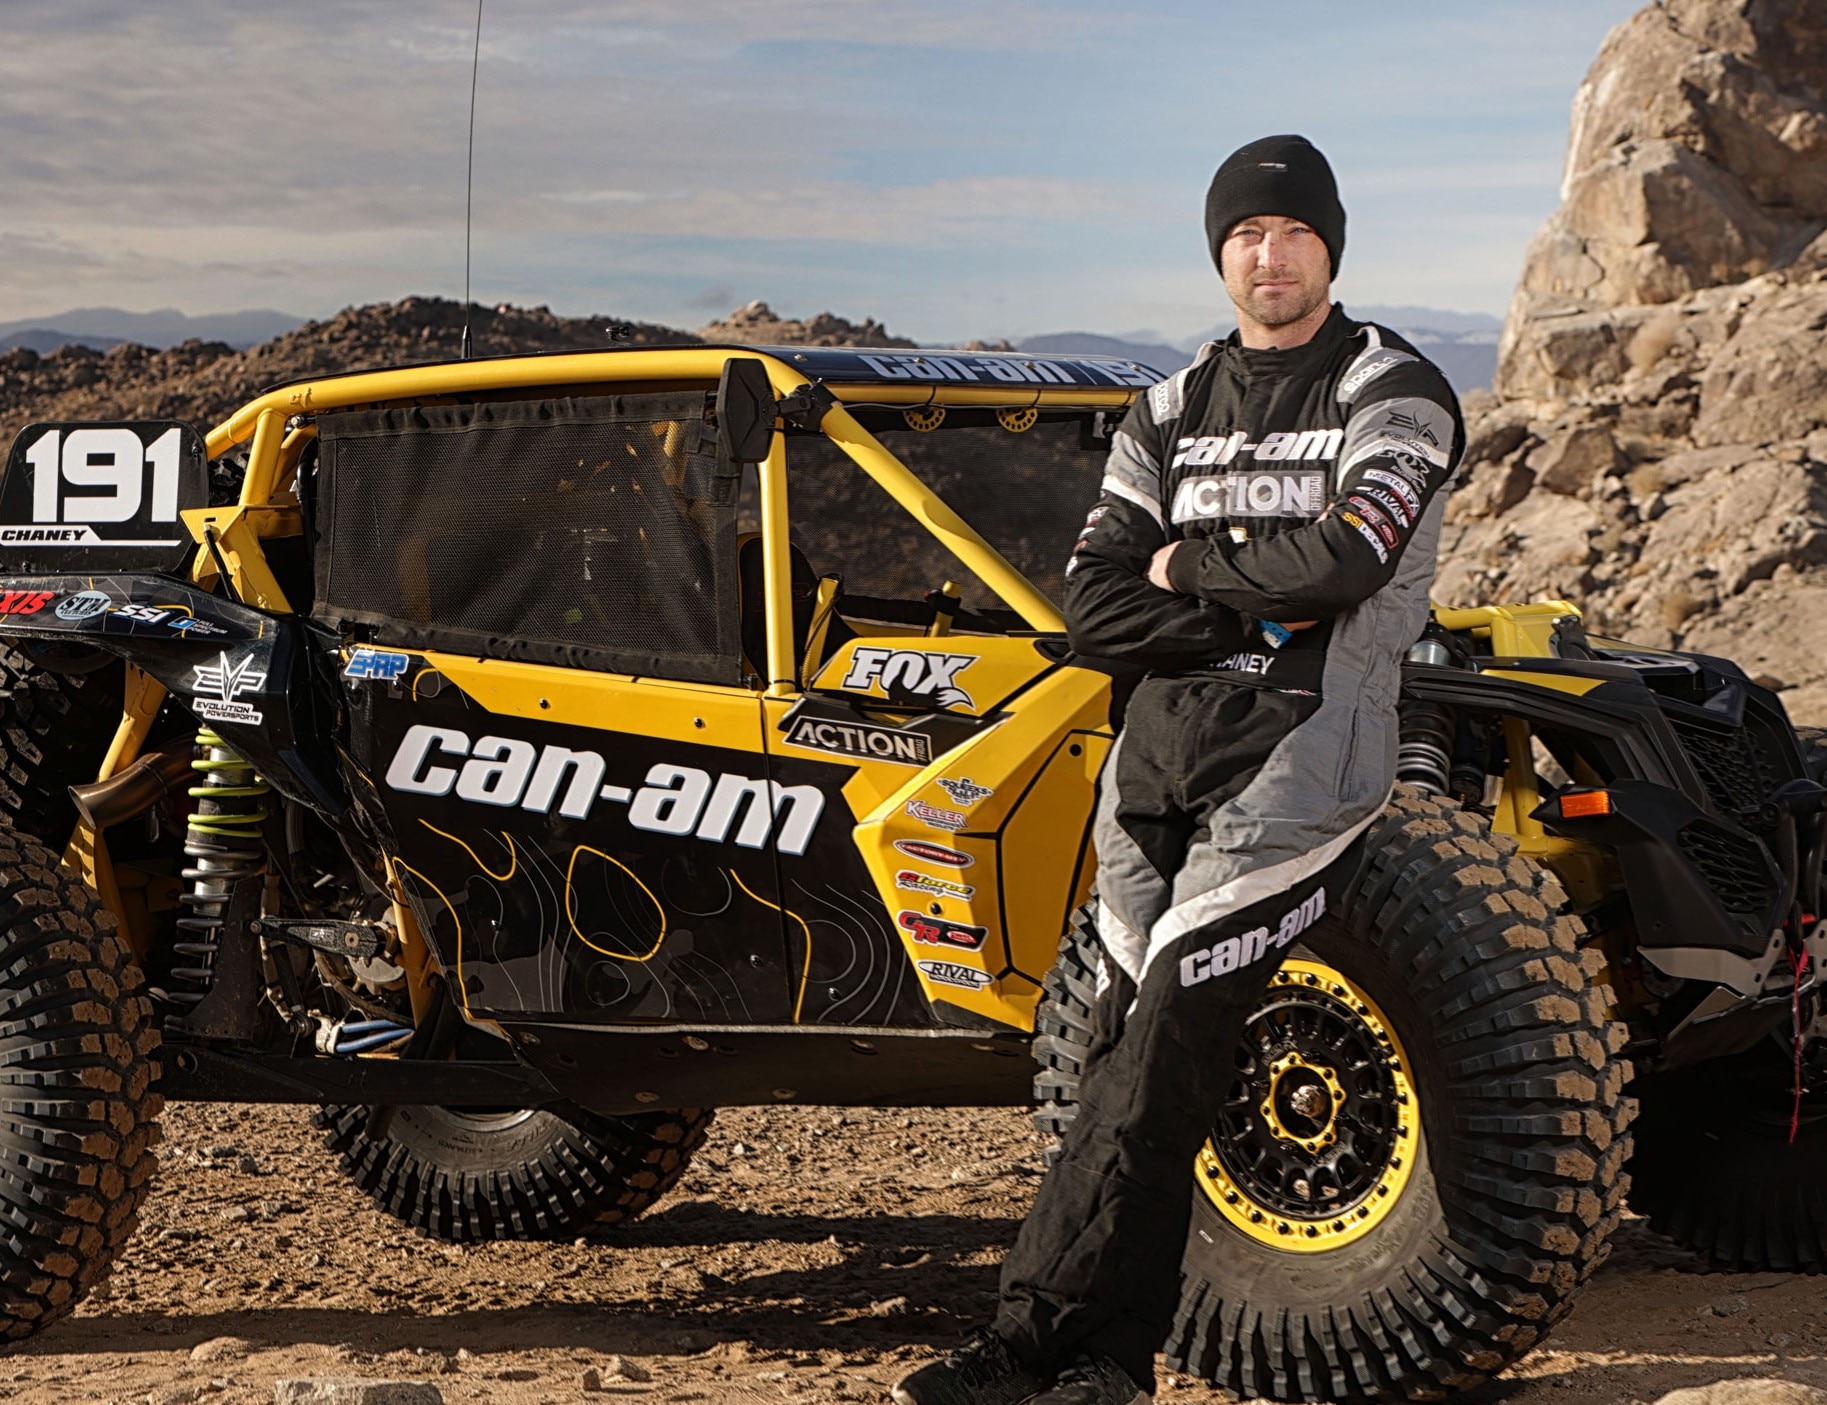 Kyle Chaney Can-Am racer at King of the hammers